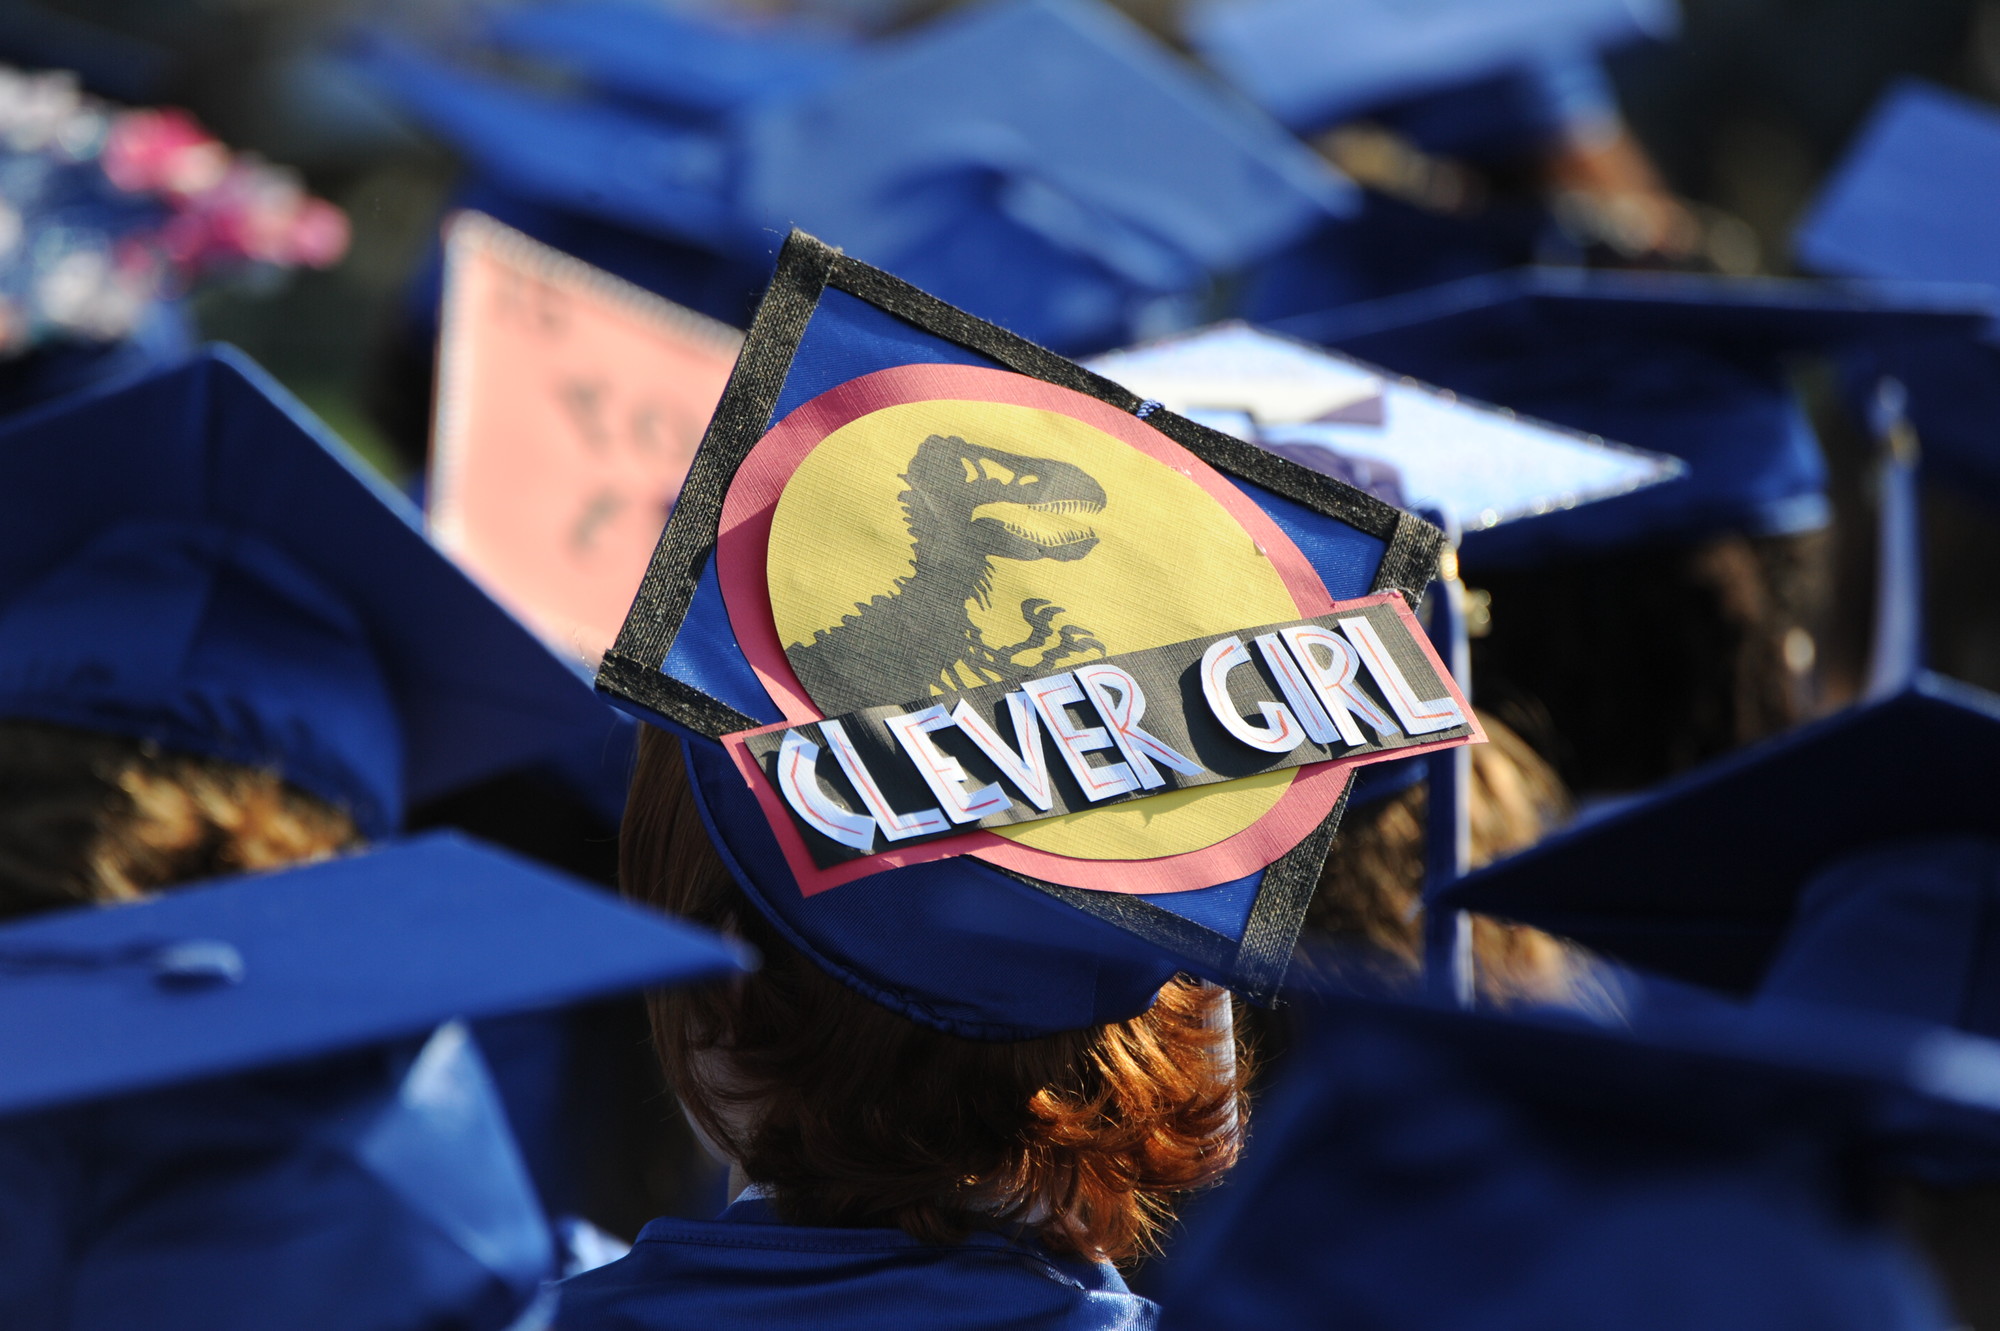 Graduates decorated their caps to stand out from the crowd and show off their personal styles.